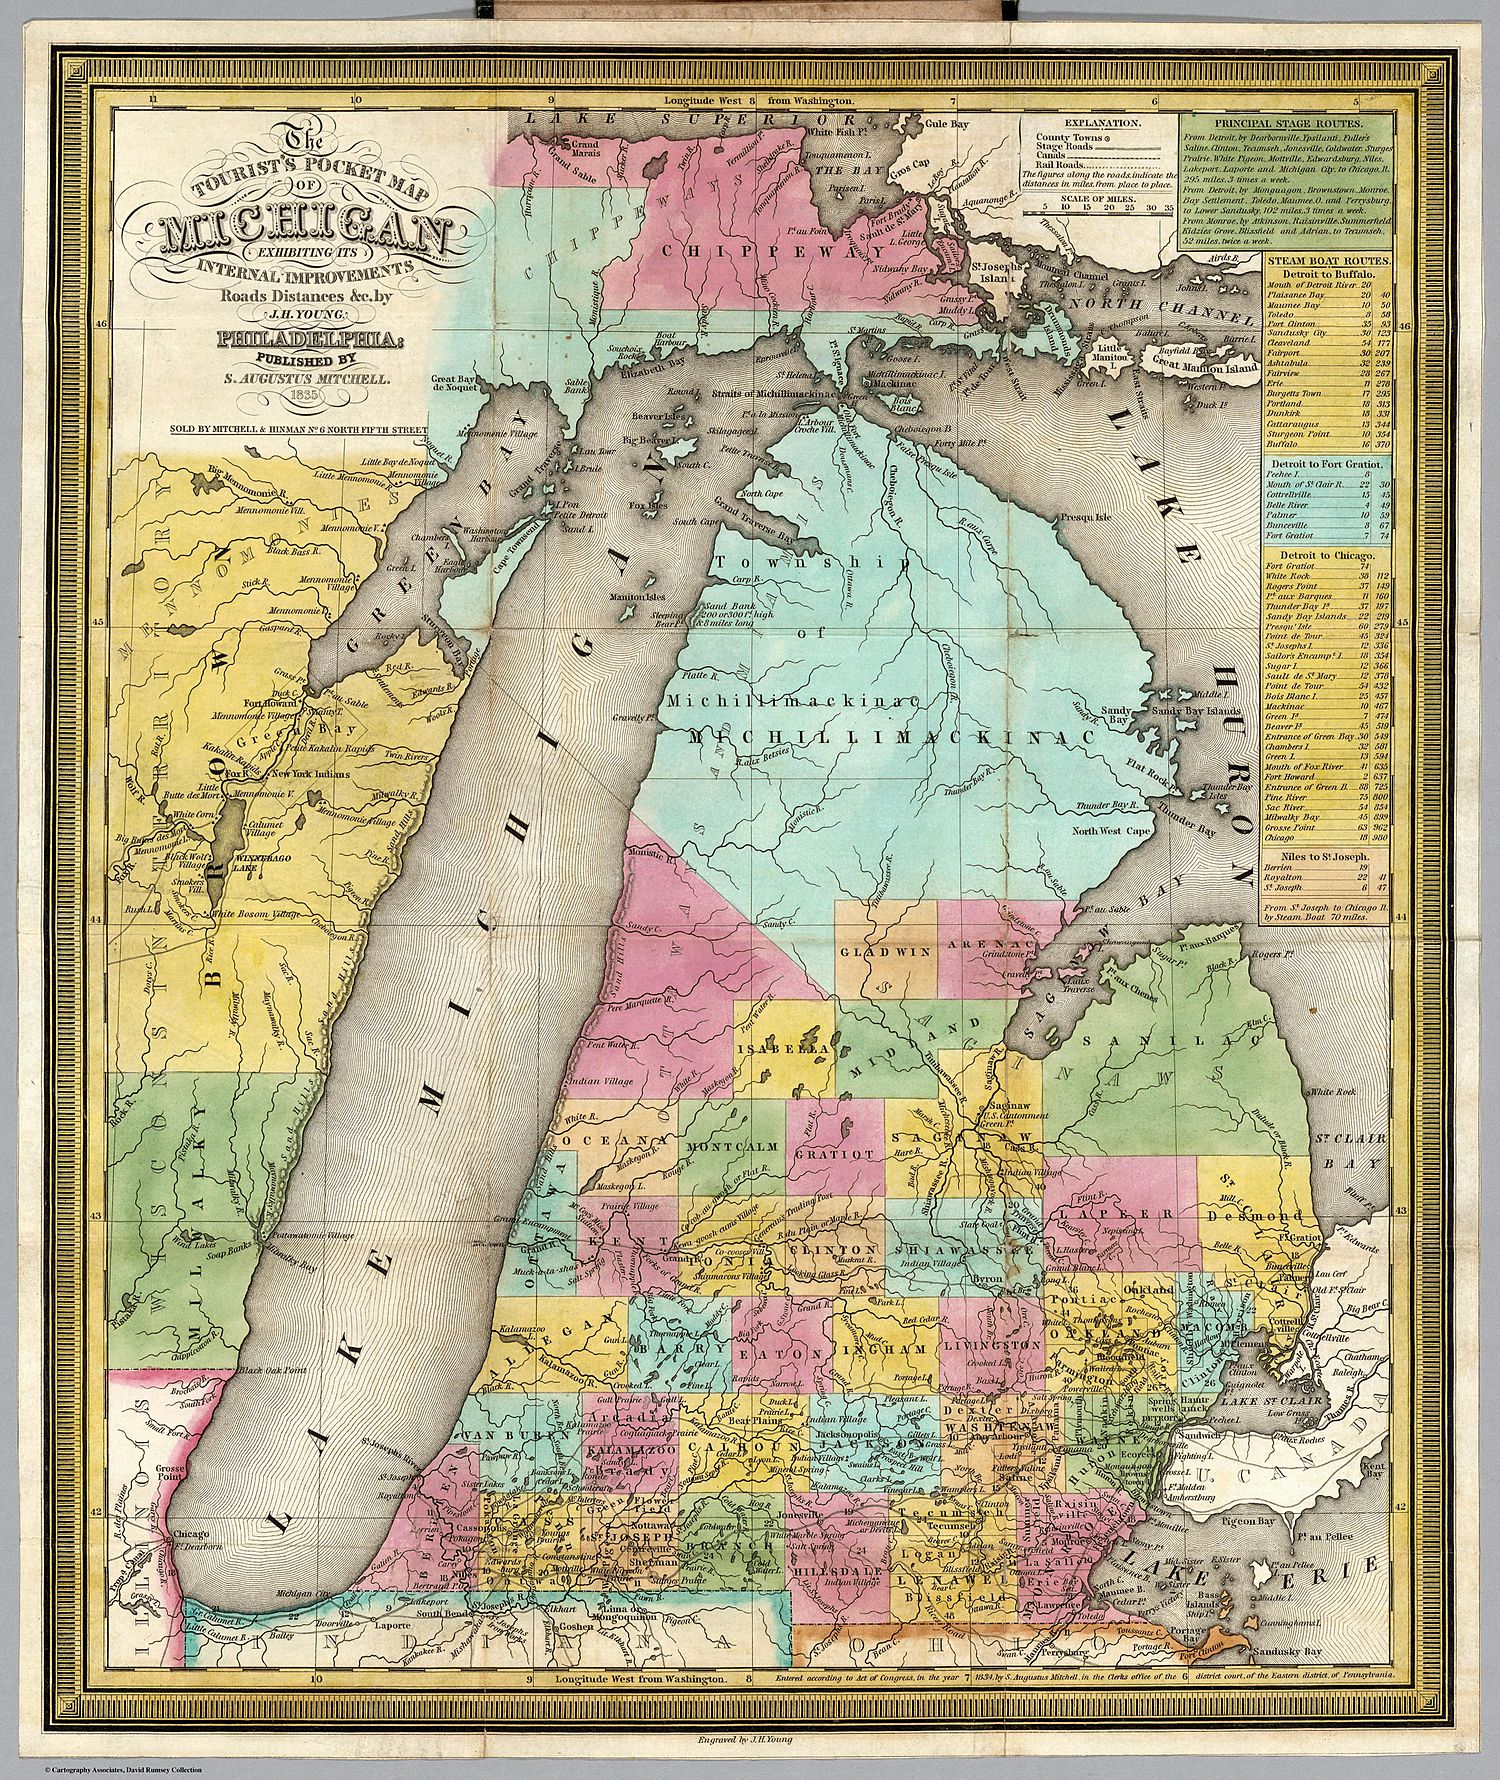 Northern Michigan islands, rivers, and shore landmarks featured prominently on this 1835 Tourist's Pocket Map Of Michigan.